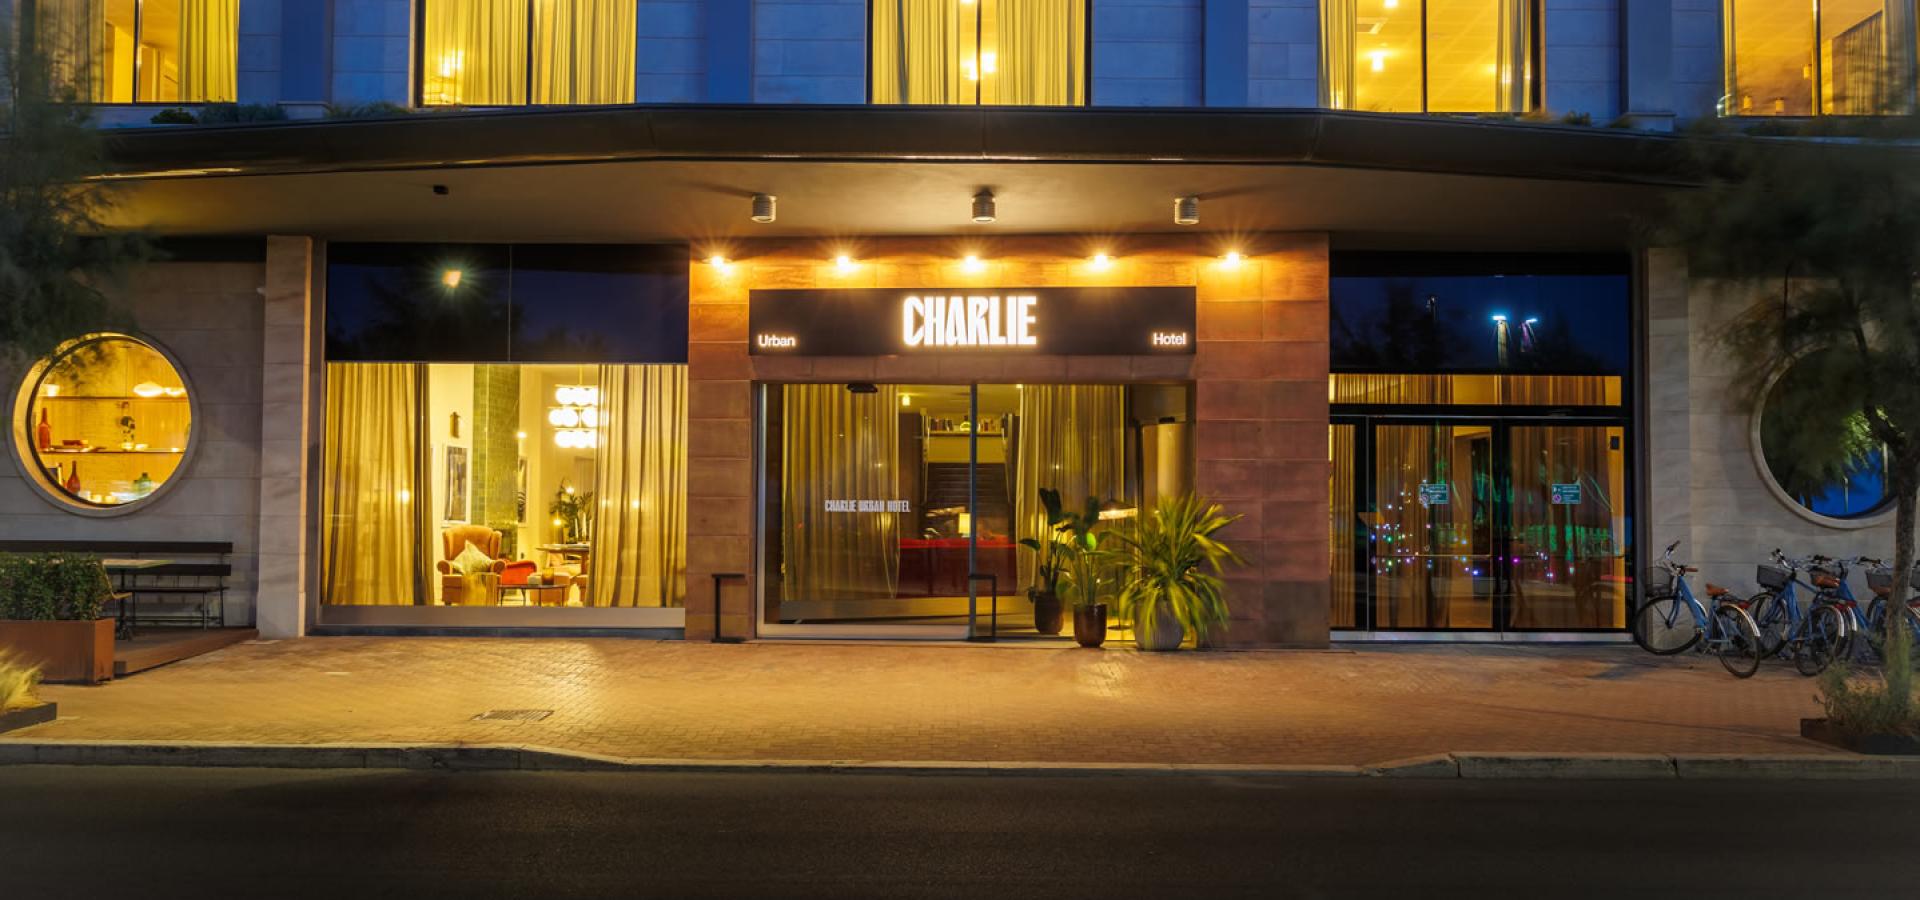 charliehotels it offers 002